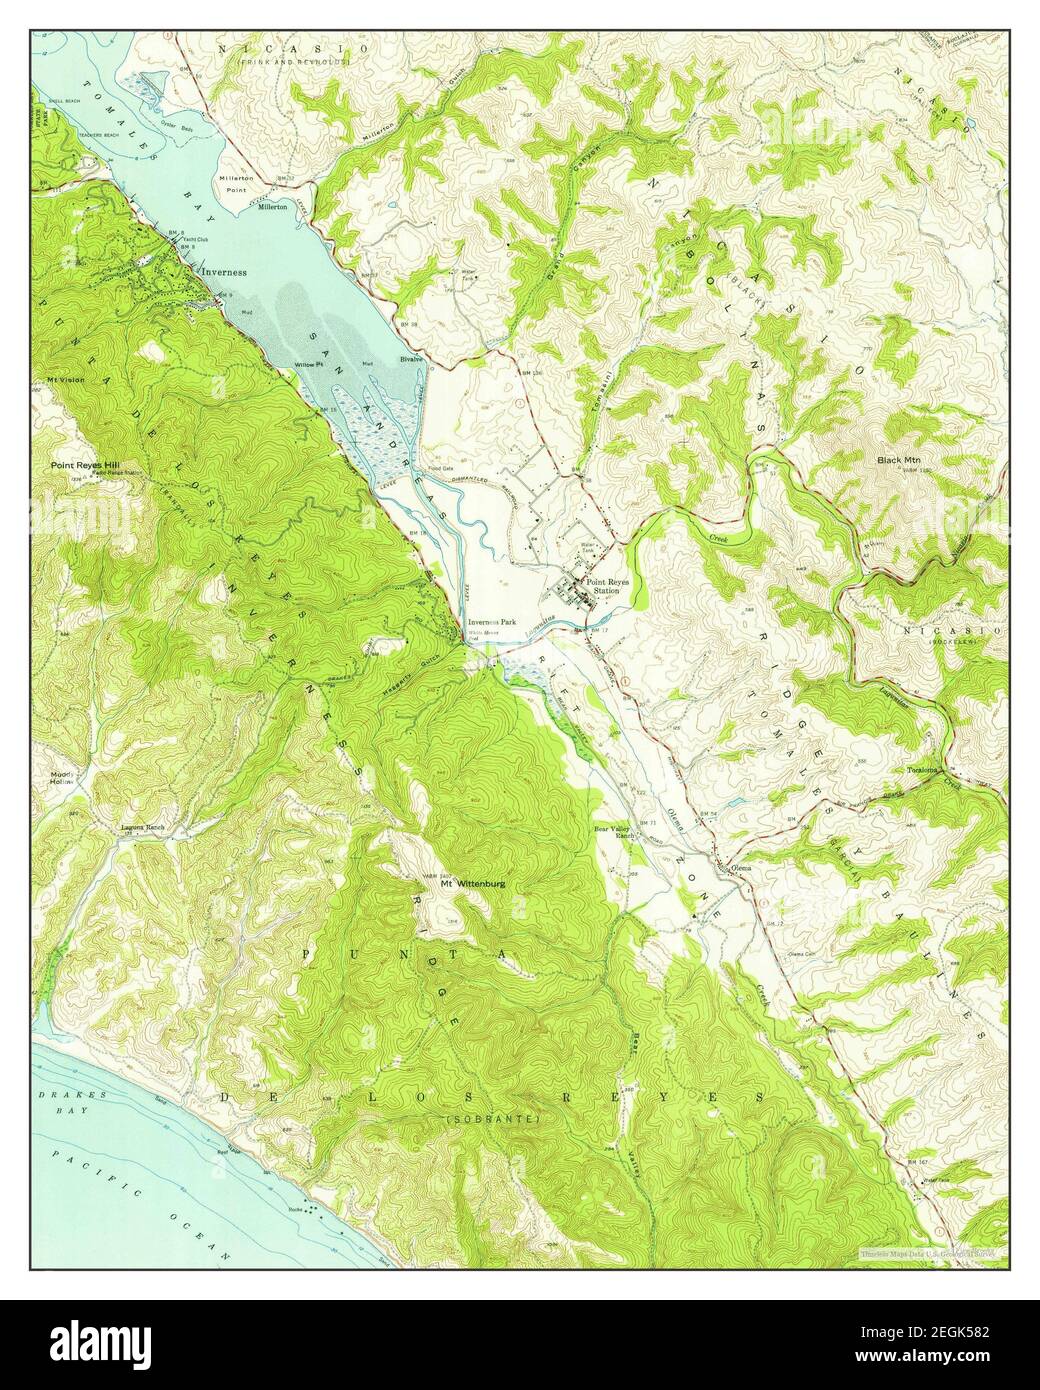 Inverness, California, map 1954, 1:24000, United States of America by Timeless Maps, data U.S. Geological Survey Stock Photo